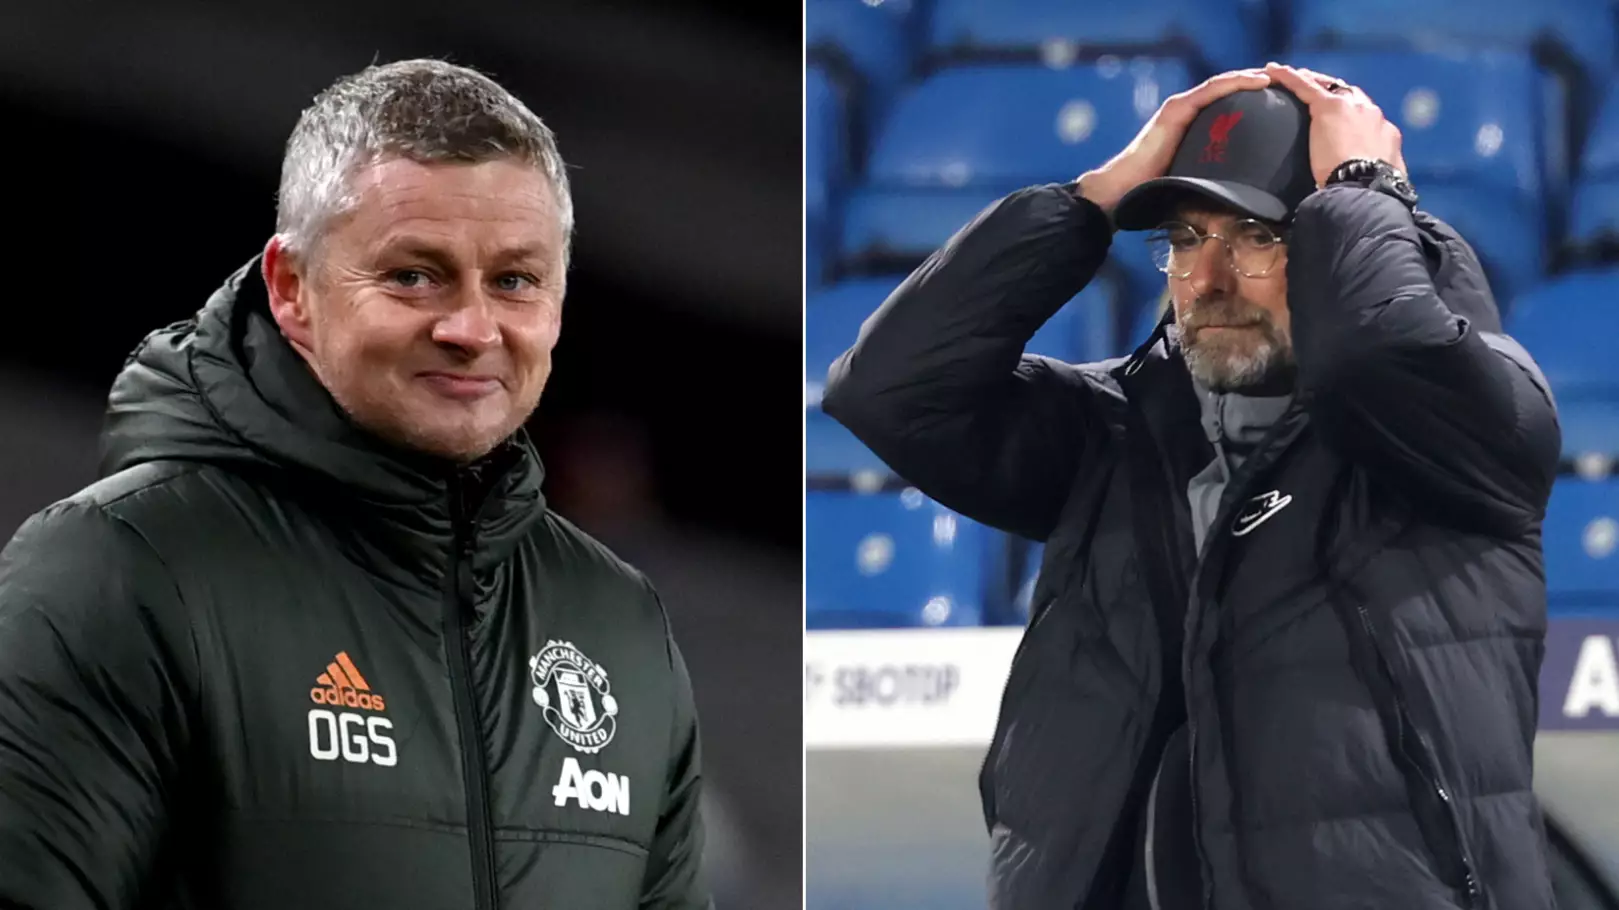 Ole Gunnar Solskjaer Makes 10 Changes For Manchester United's Game Against Leicester City, Liverpool Fans Fume